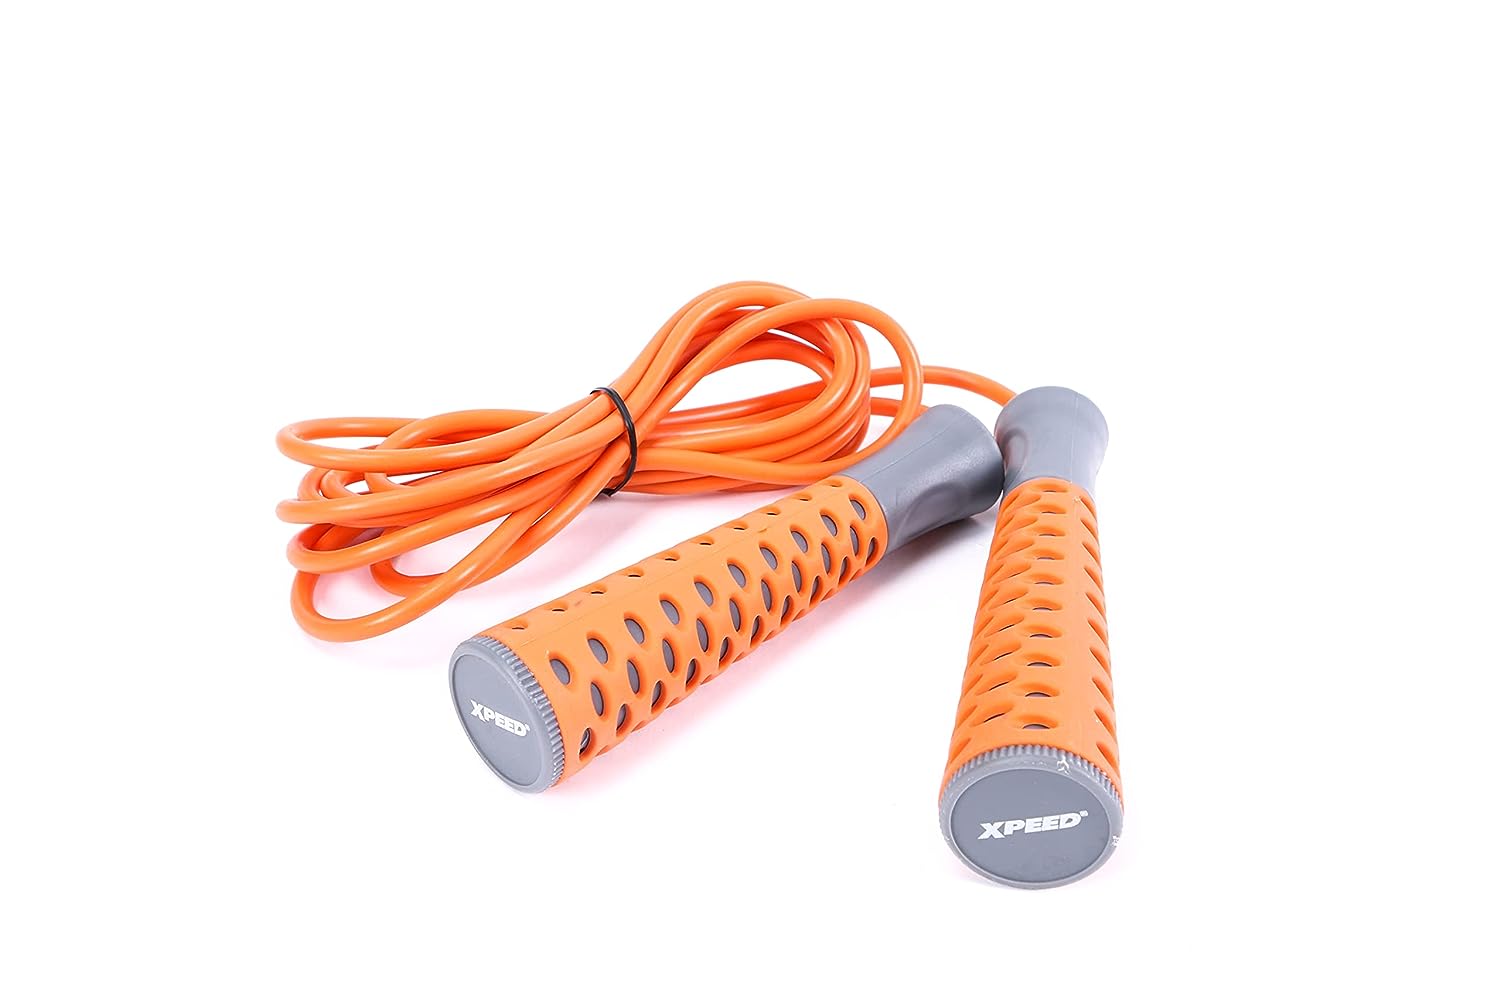 XPEED Fitness Skipping Rope for Men & Women Cardio Workout Skipping Rope for Weight Loss Fat Loss Home & Gym Exercise Equipment Portable Skipping Rope with Comfortable Grips